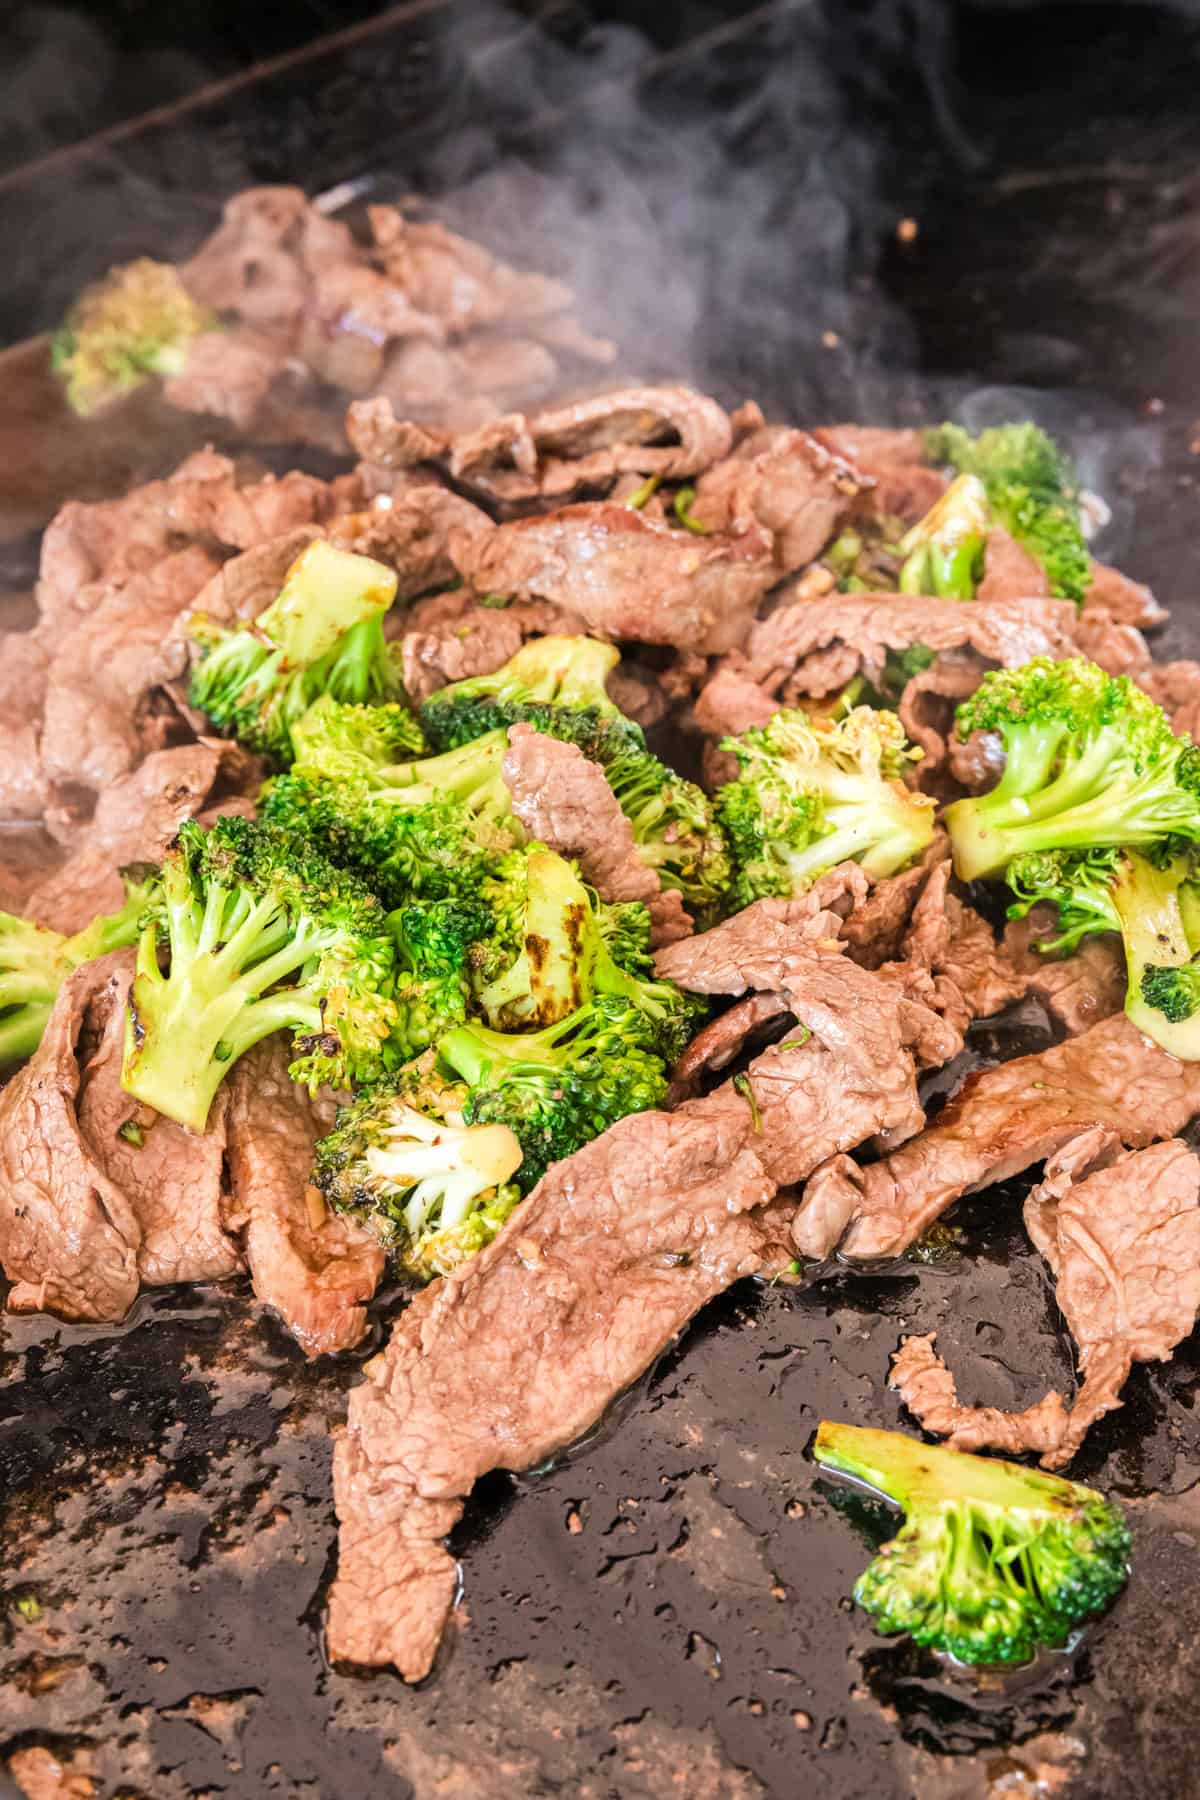 Cooked meat and broccoli for Blackstone Beef Stir Fry recipe